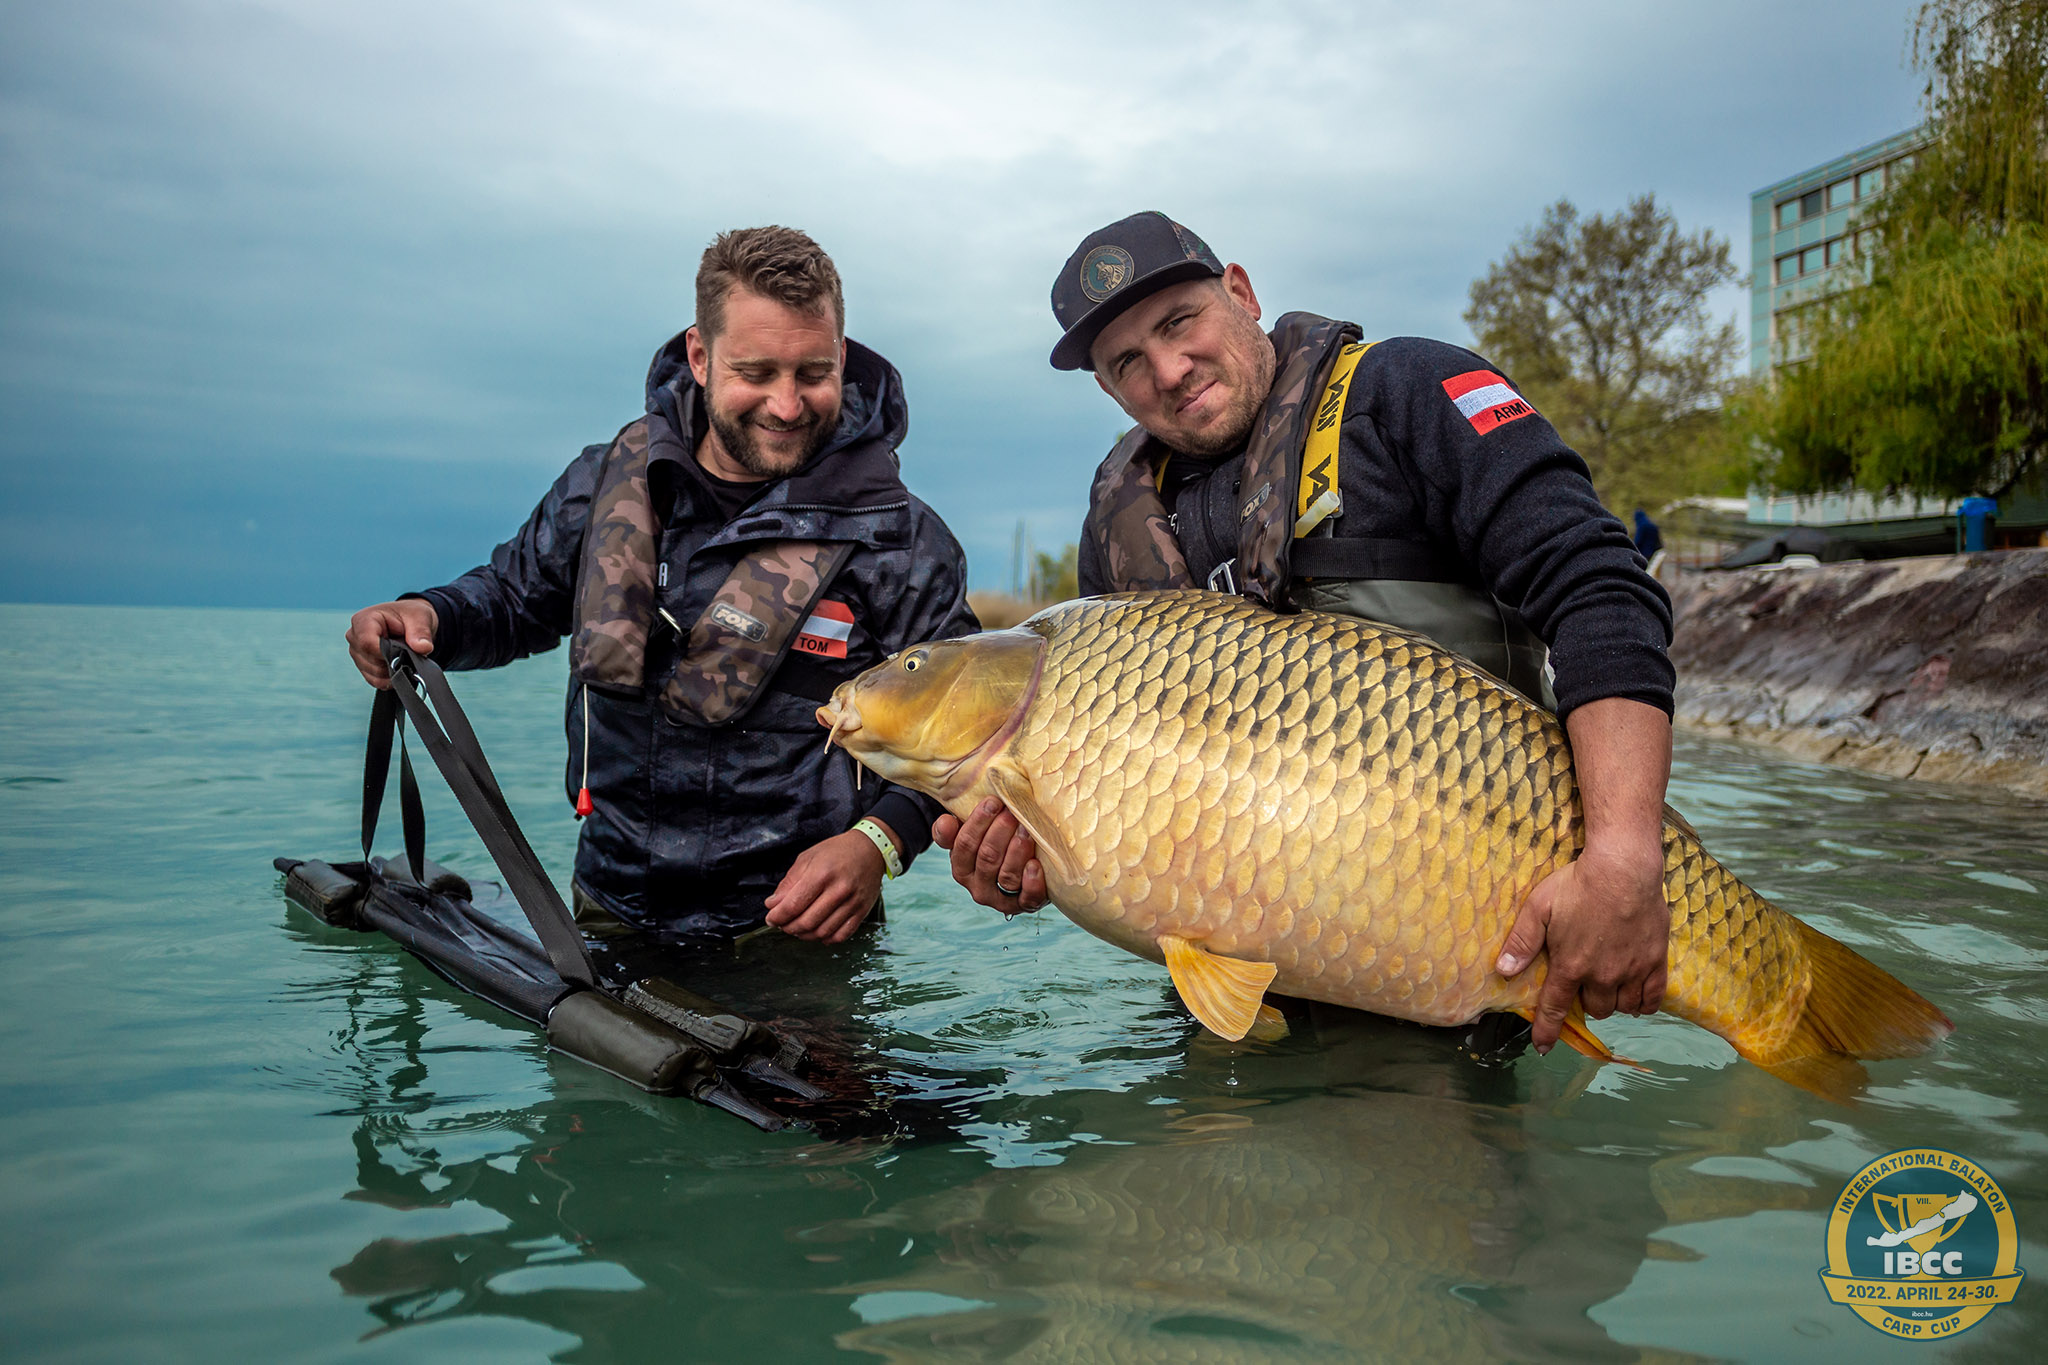 22nd Carpfishing World Championship 2022 – Hungary – Kaposvár – Deseda Lake  Second day Second weigh The team ranking updated after the 2nd weigh of  September 22 2022 is: first Moldova Team